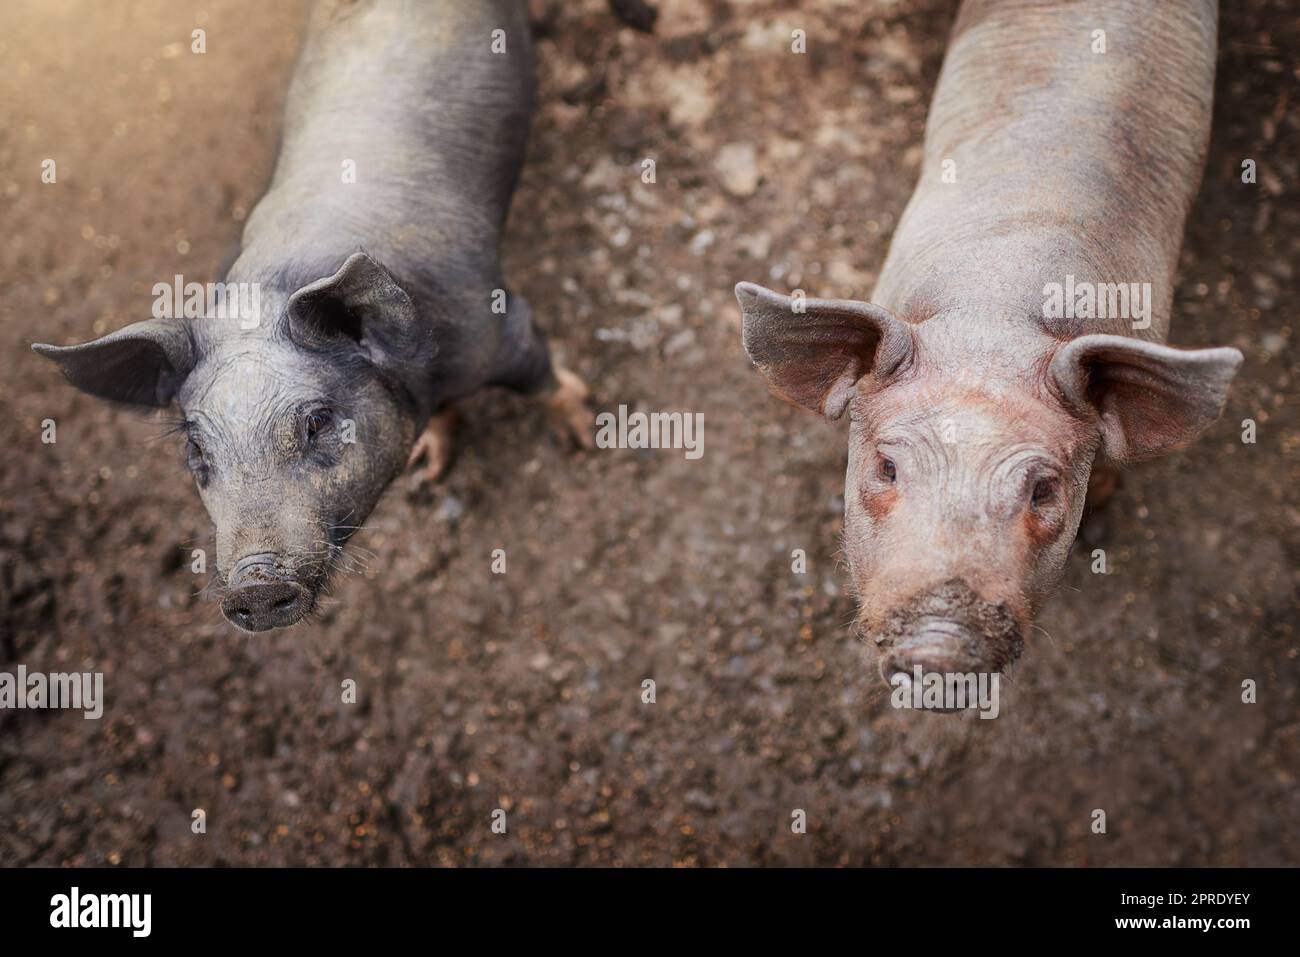 Were well taken care of on this farm. High angle shot of two pigs standing in their pen on a farm. Stock Photo